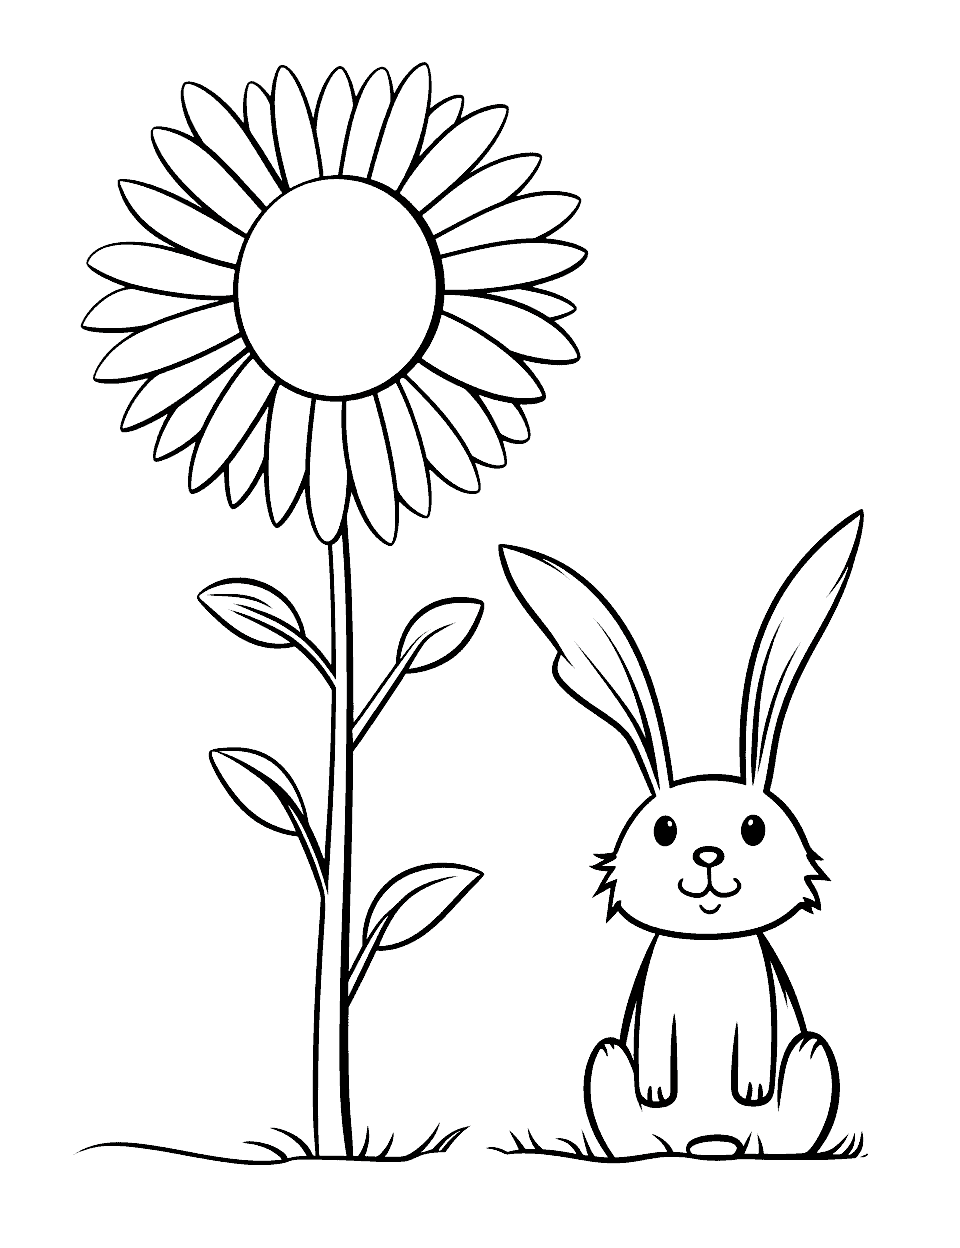 Tiny Bunny, Tall Sunflower Bunny Coloring Page - Emphasizing the size difference, a small bunny looking up at a towering sunflower.